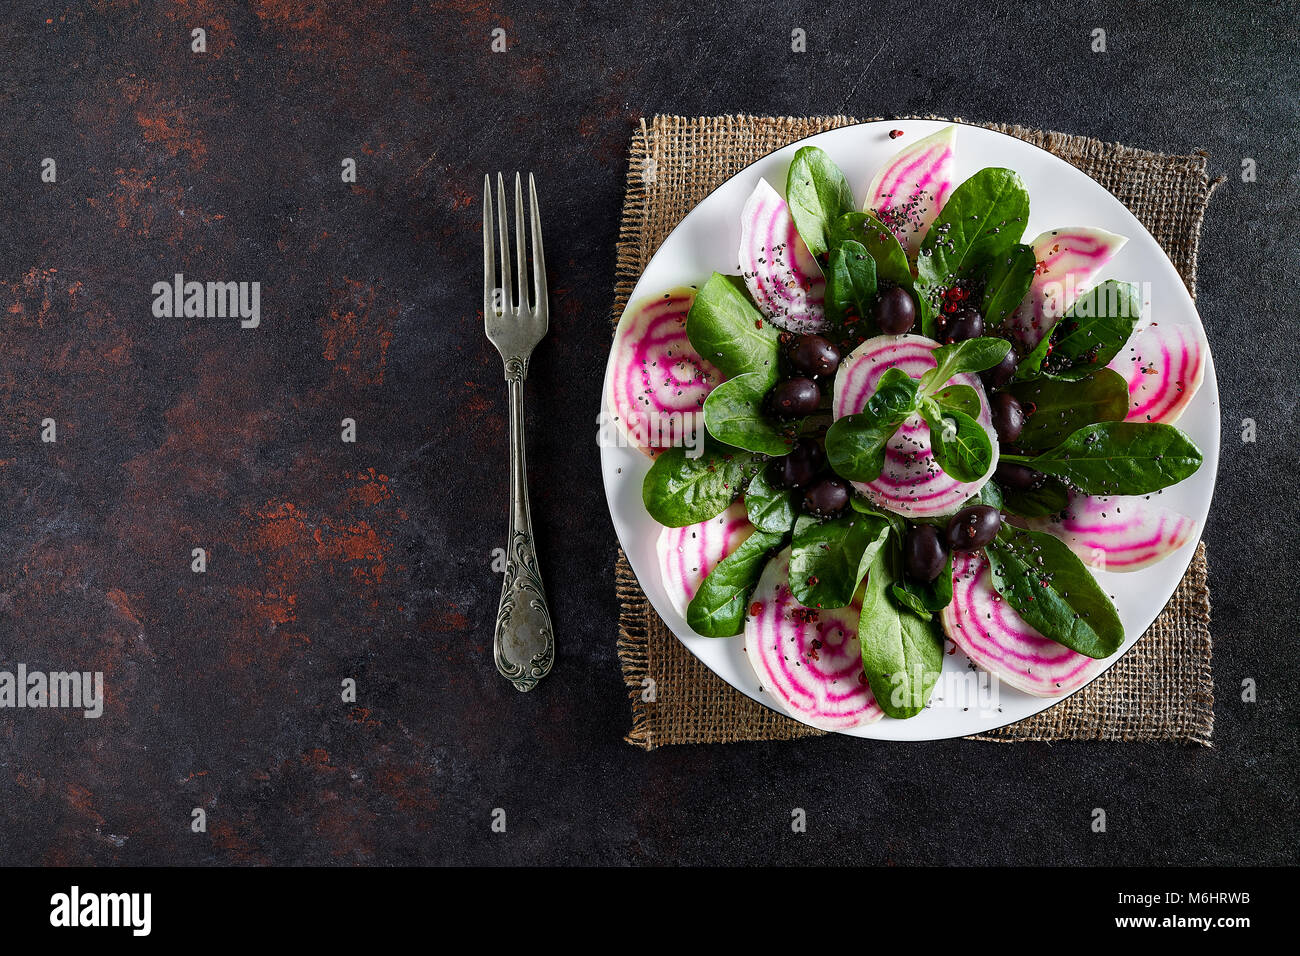 Plate with beet salad, from root to leaves, with some corn salad and black olives, overhead shot. Stock Photo